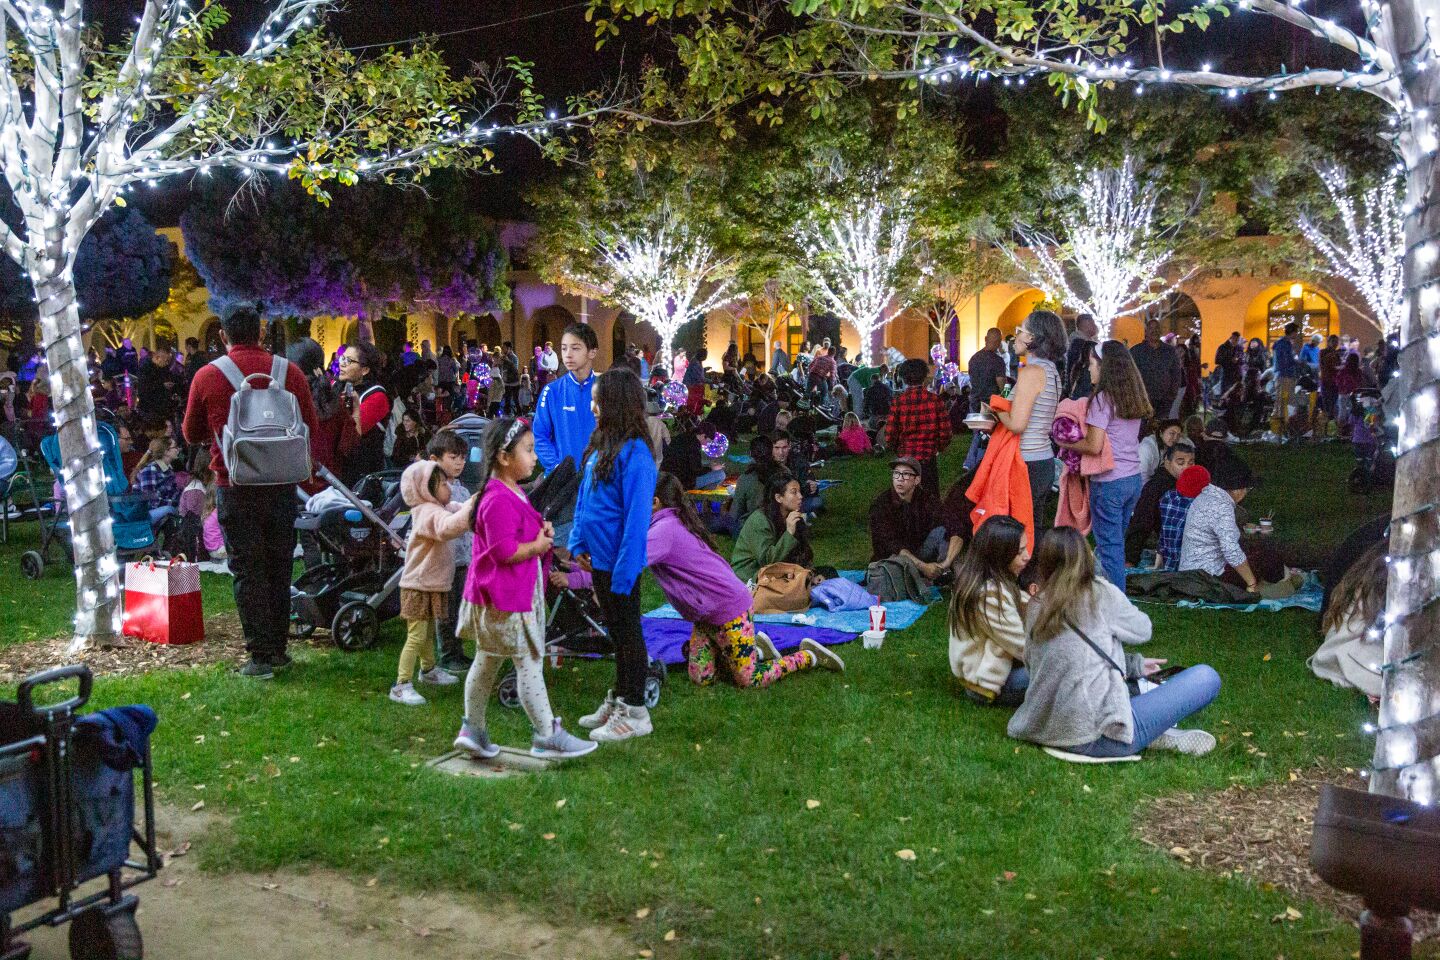 Holiday revelers turn out for Liberty Station's tree lighting Nov. 26.